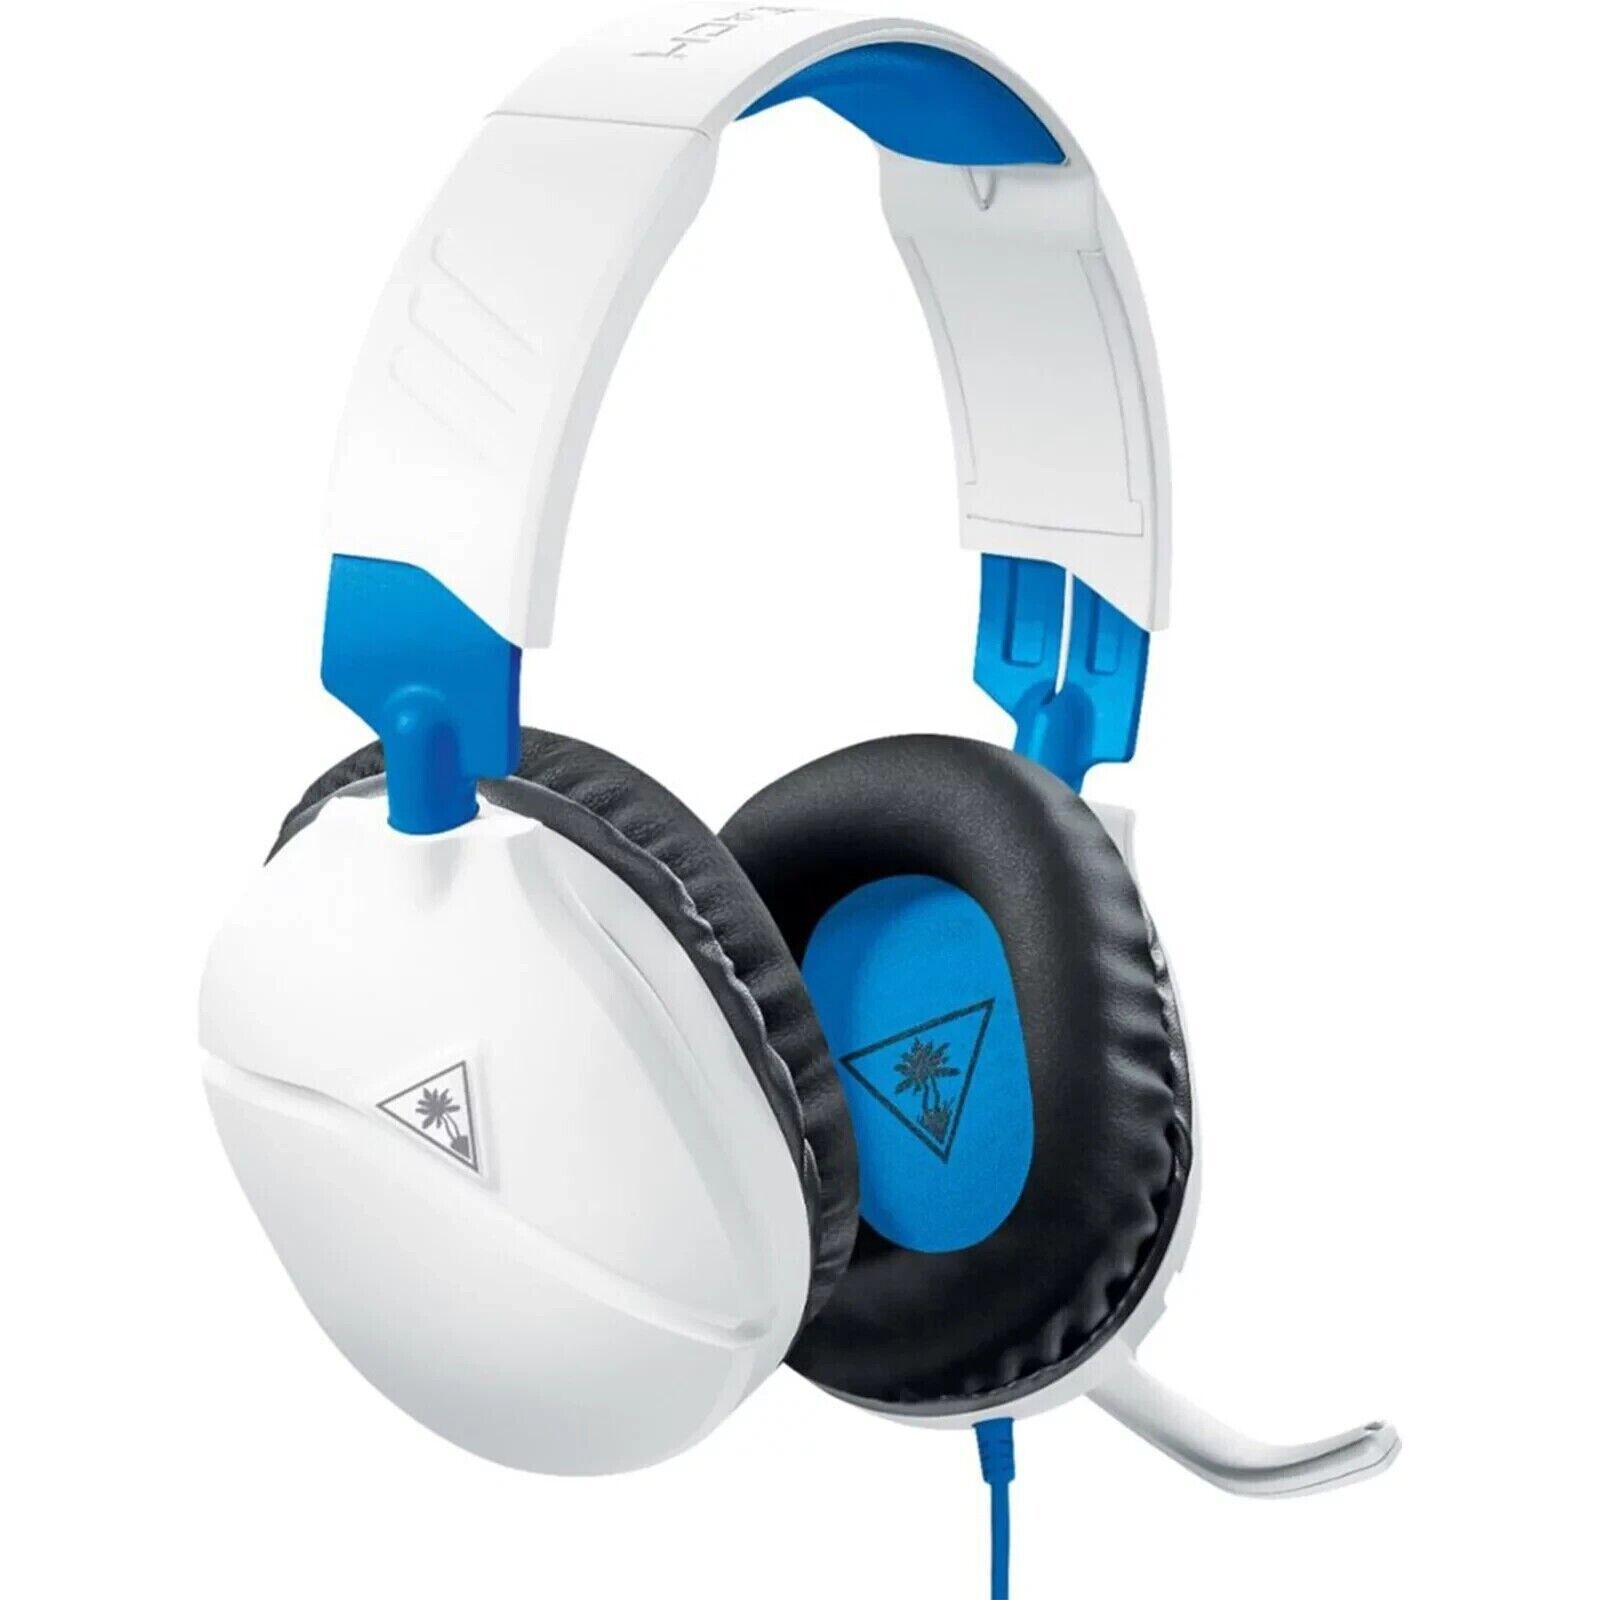 Turtle Beach Recon 70 White Over the Ear Gaming Headset for PlayStation 4 / PS4 - $27.67